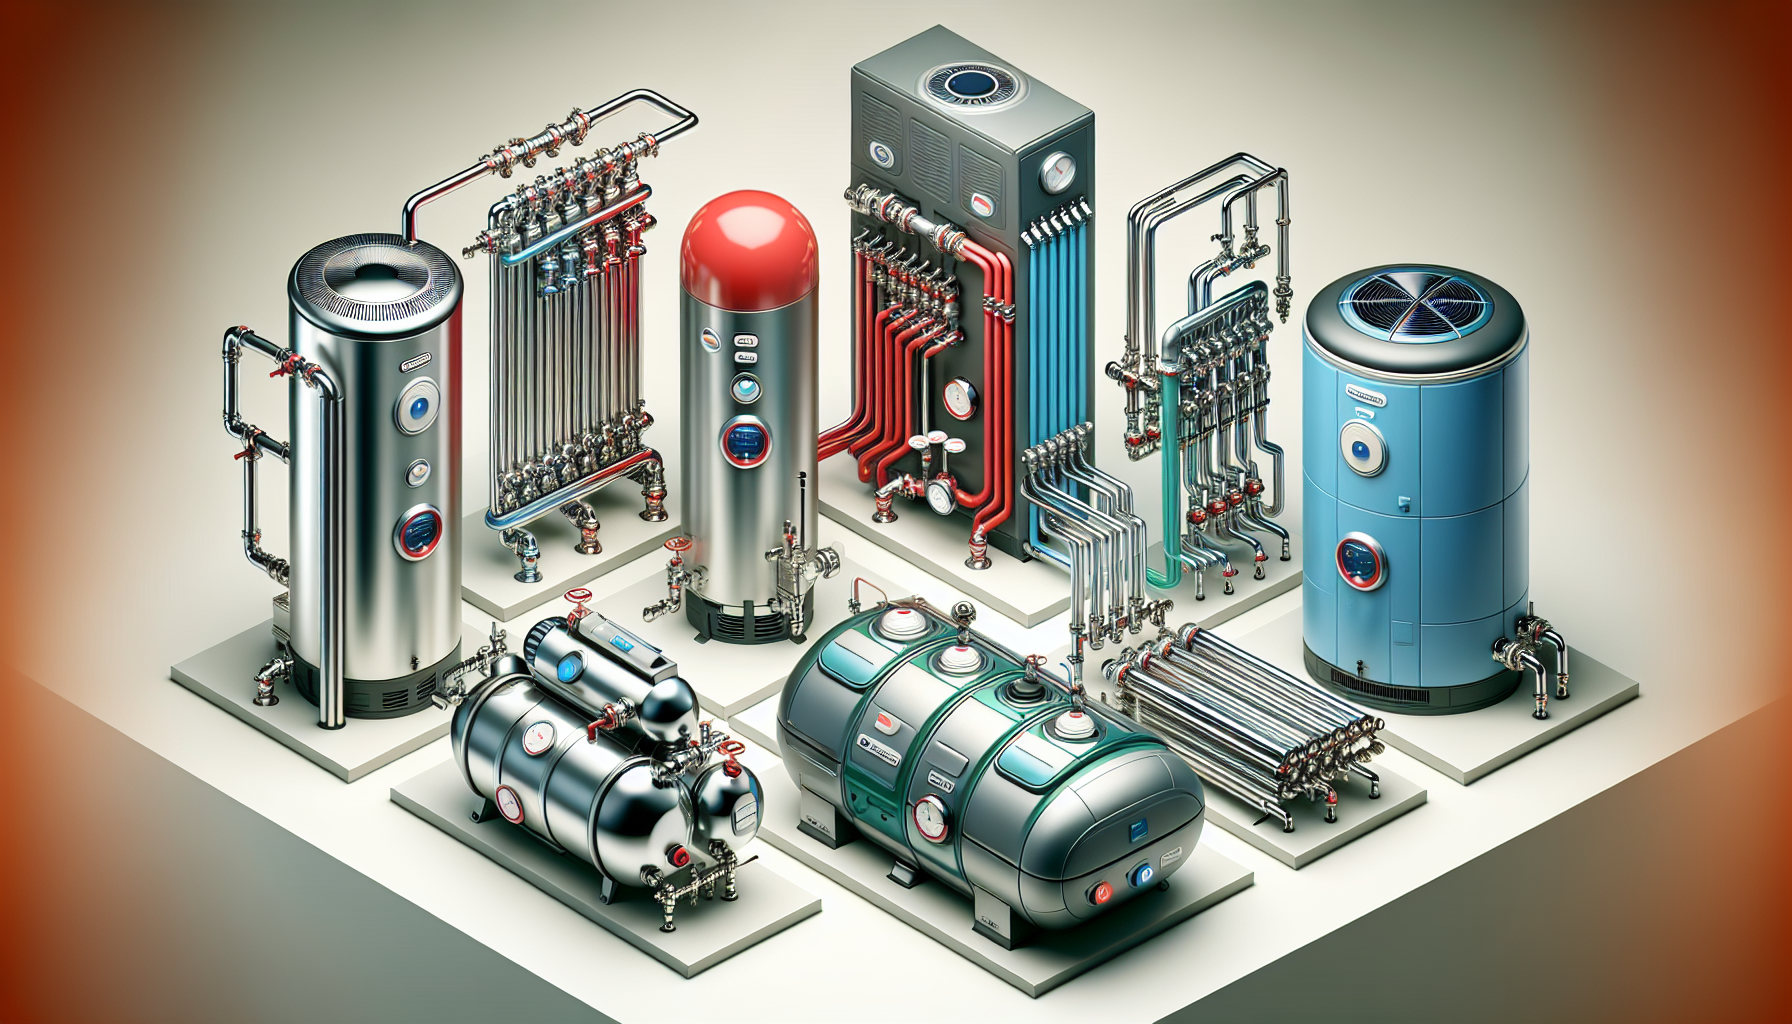 Variety of hot water systems - electric, gas, solar, and heat pump